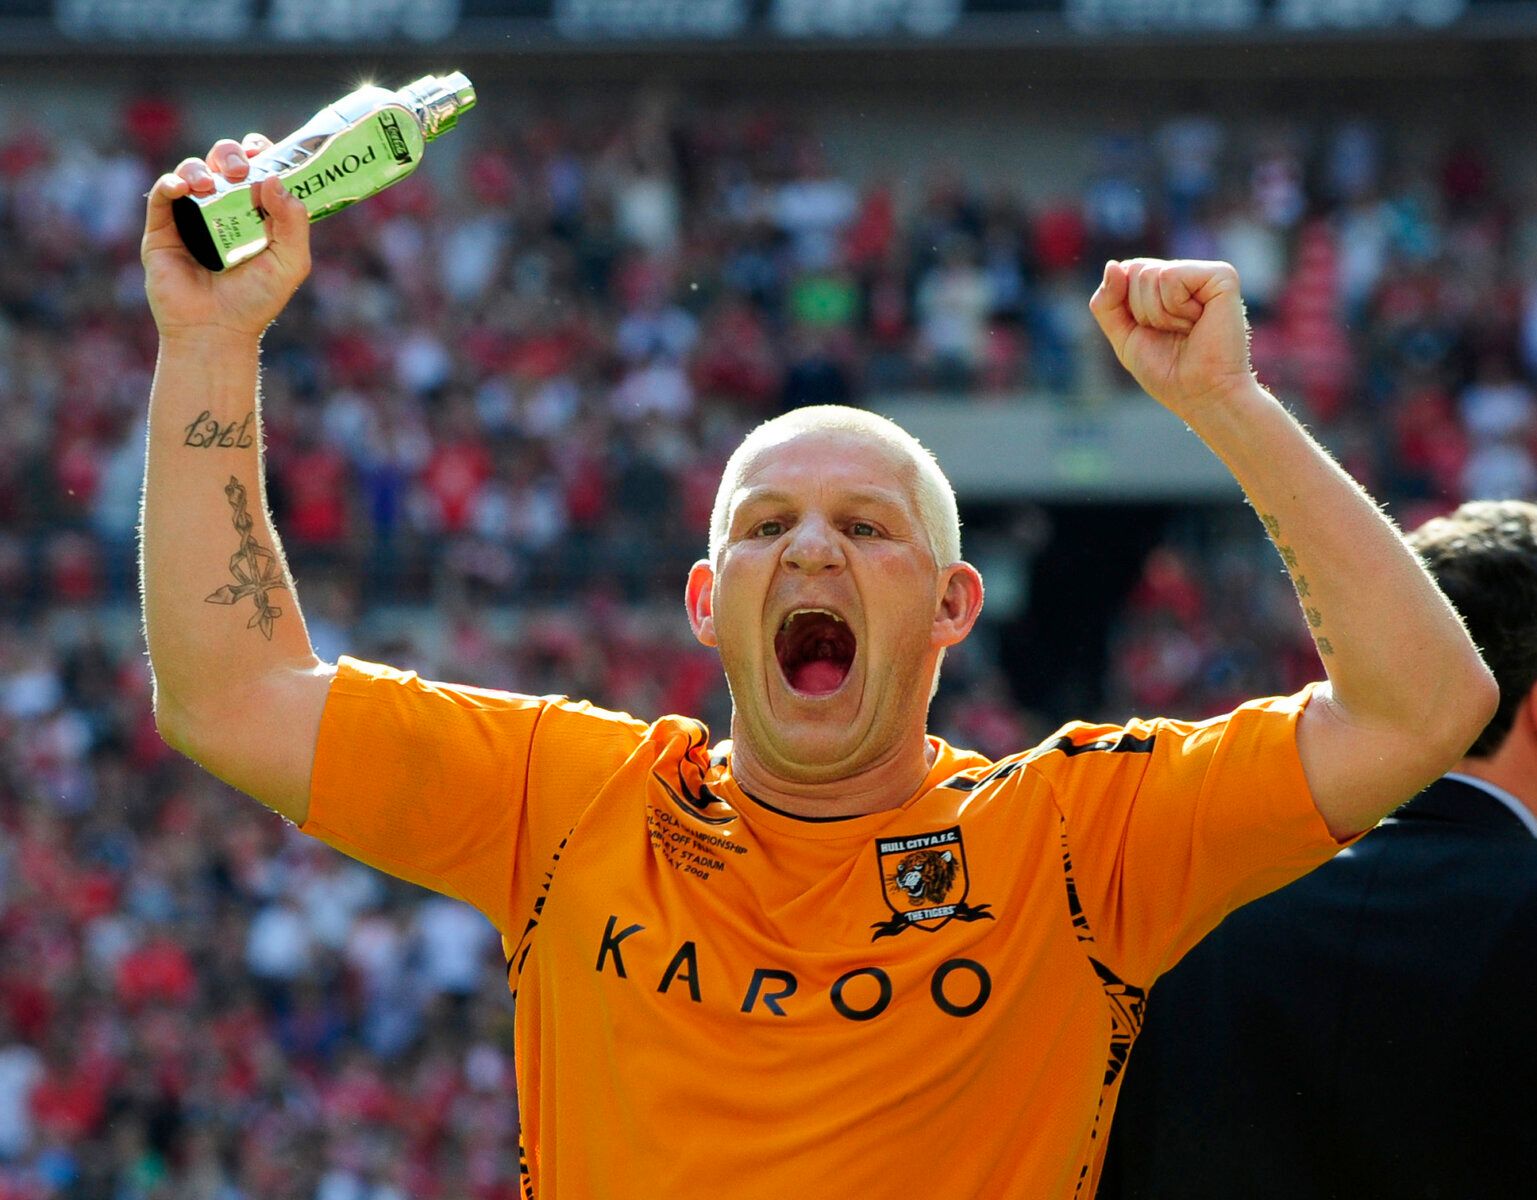 Hull City's Dean Windass reacts after beating Bristol City in the Championship playoff for a place in the English Premier League at Wembley Stadium in London May 24, 2008.  REUTERS/ Eddie Keogh (BRITAIN)